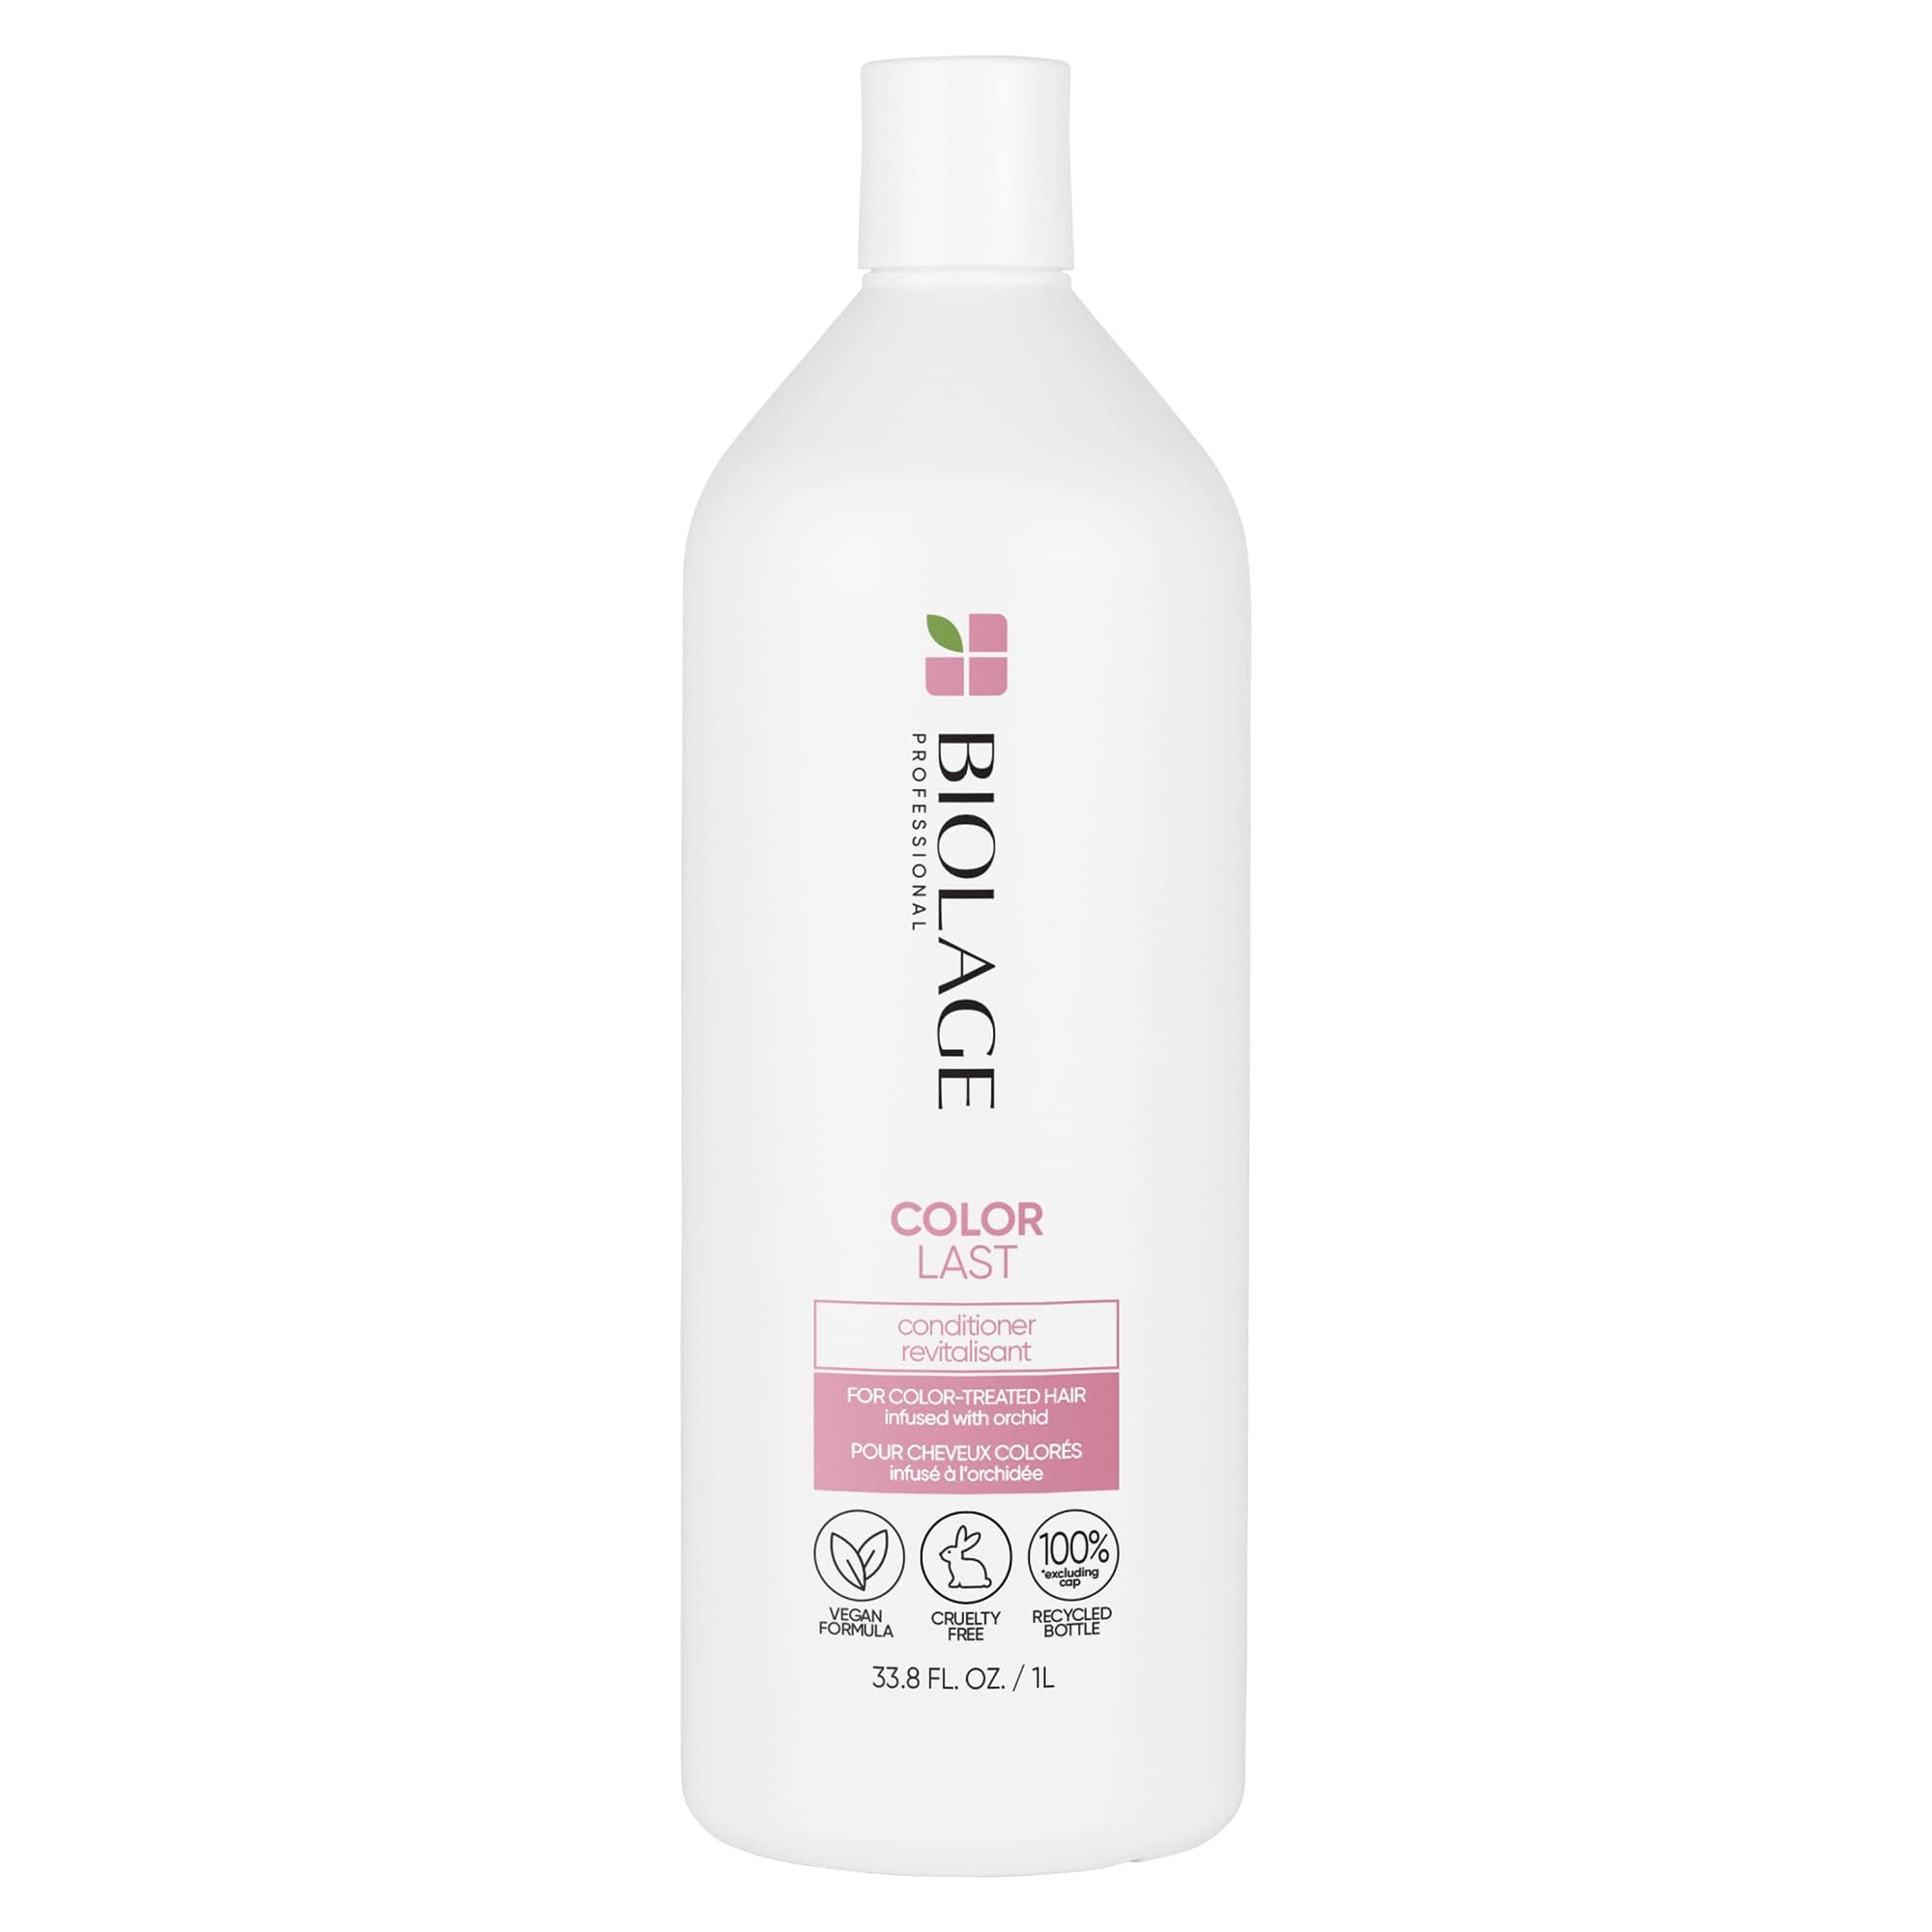 Biolage color Last conditioner  color Safe conditioner  Helps Maintain Depth & Shine  For color-Treated Hair  Paraben & Silicone